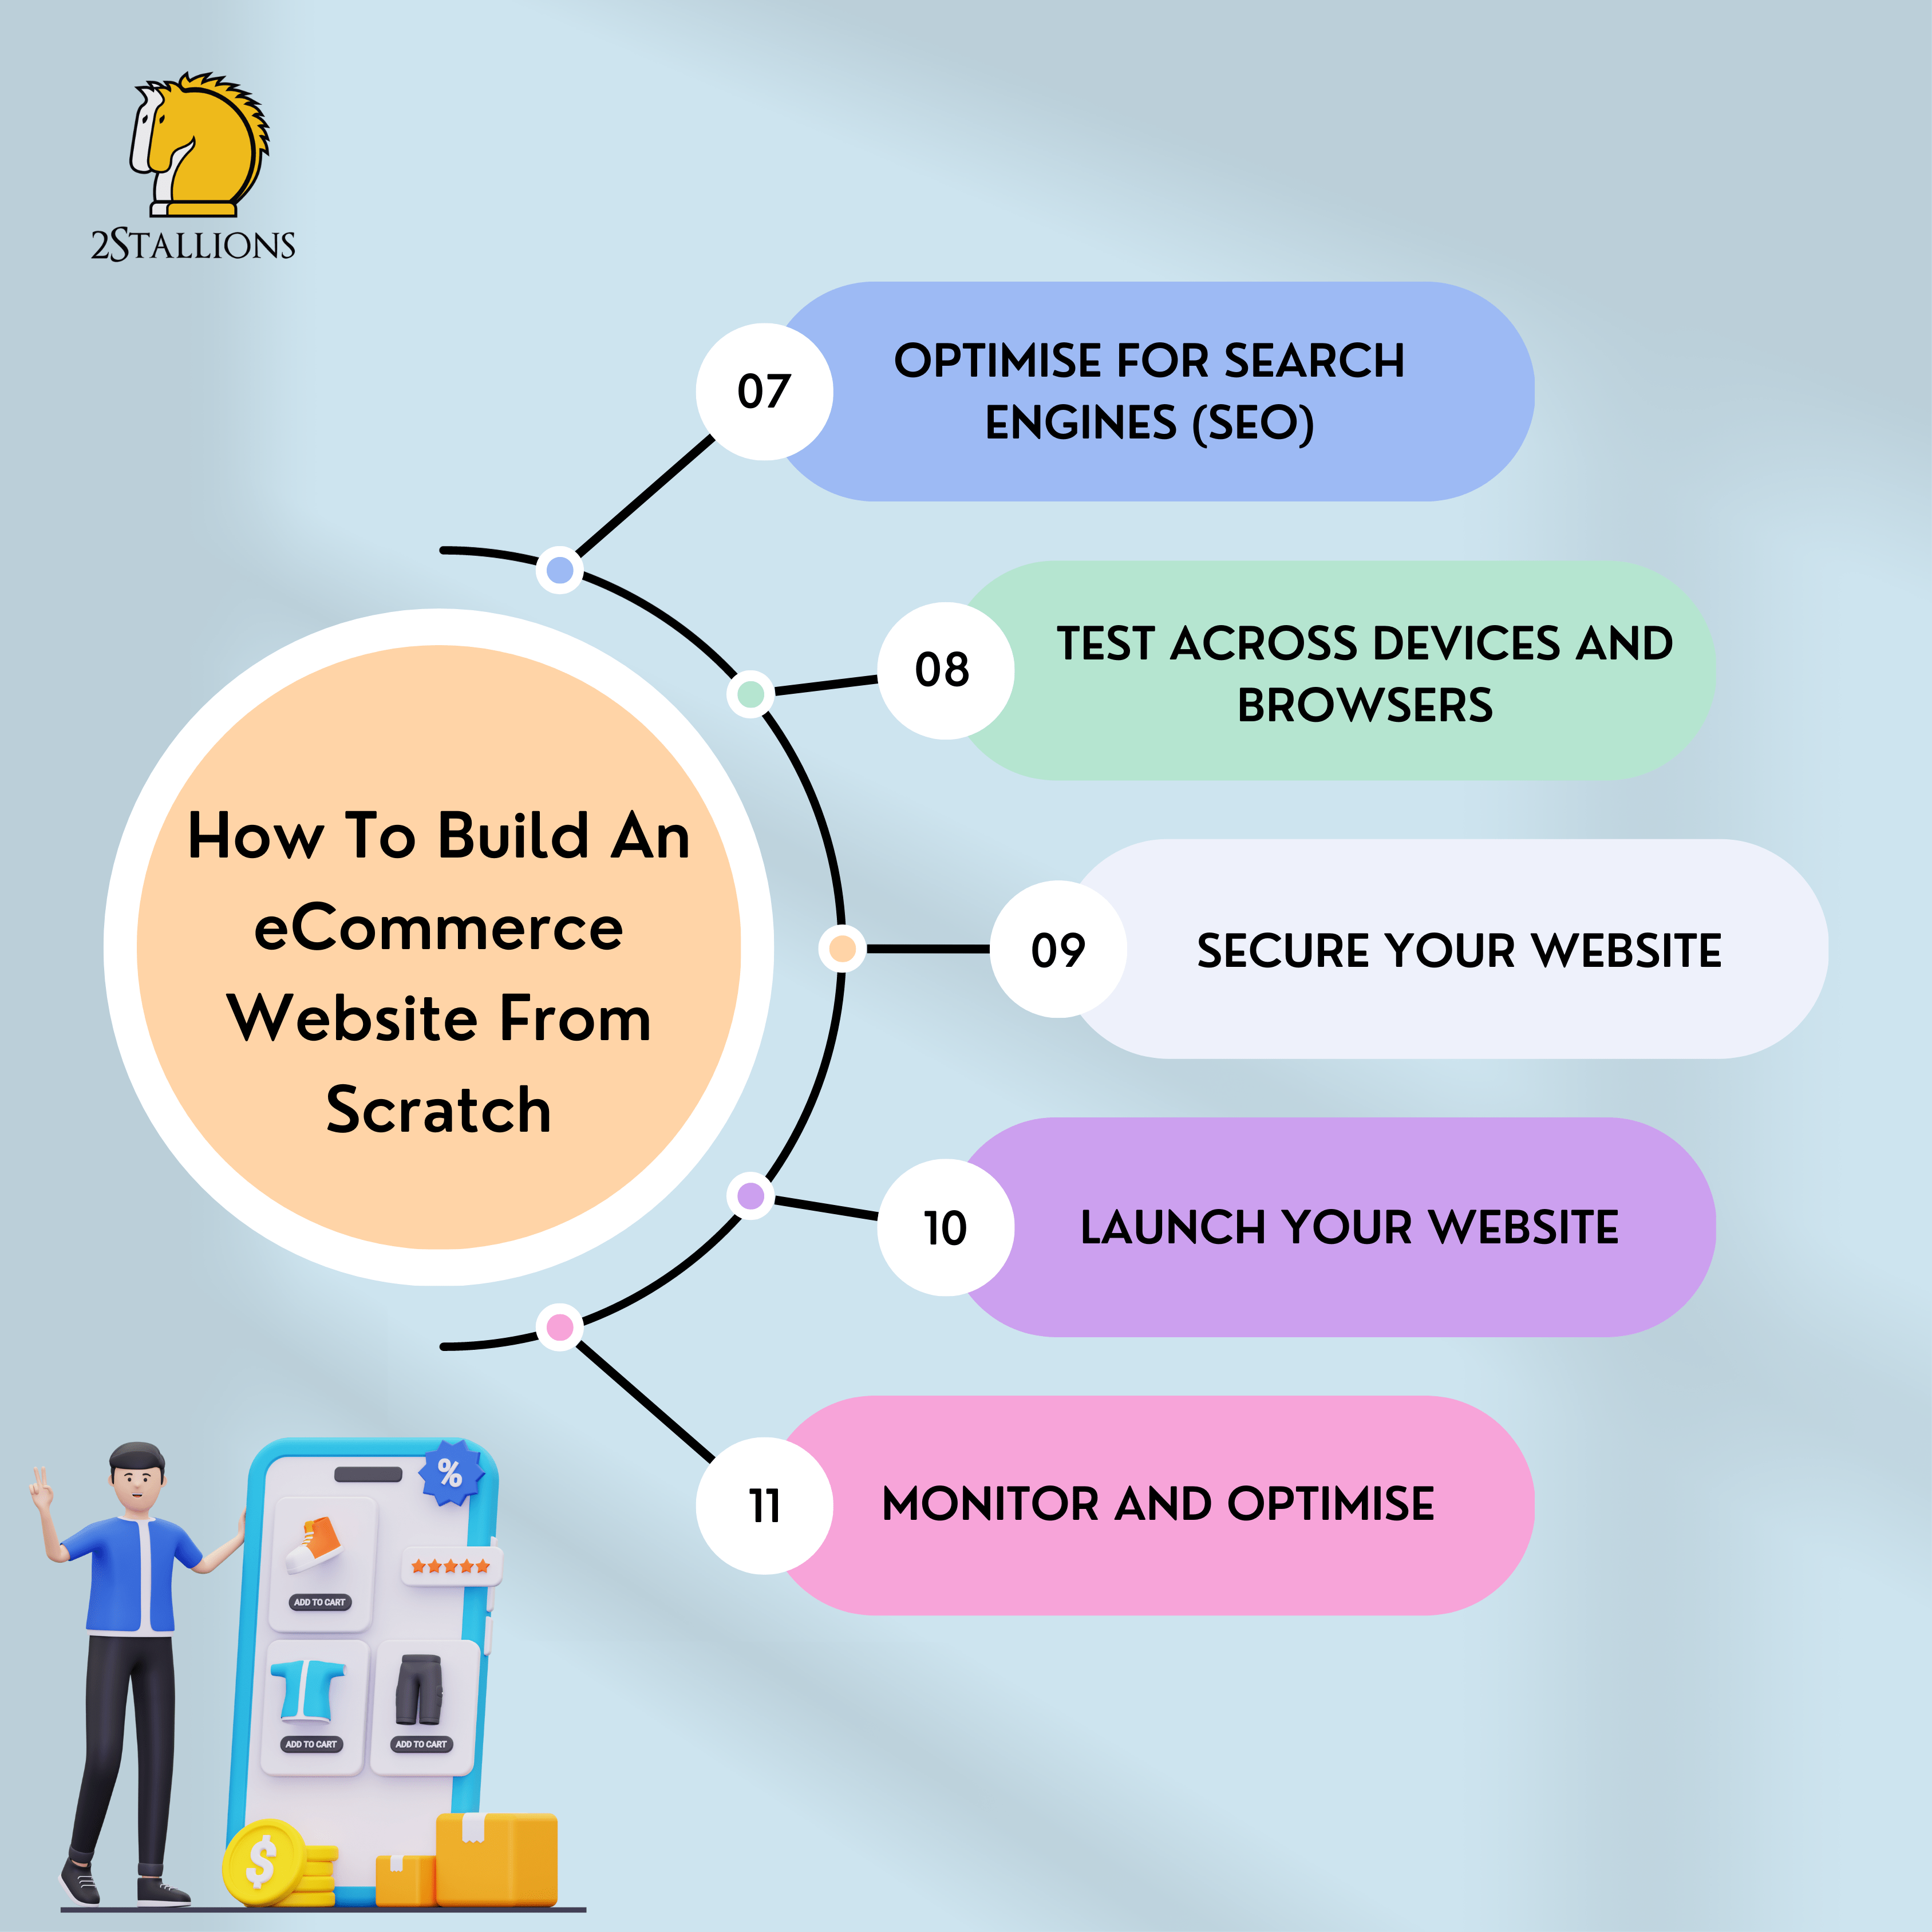 How To Build An eCommerce Website From Scratch - 2 | 2Stallions